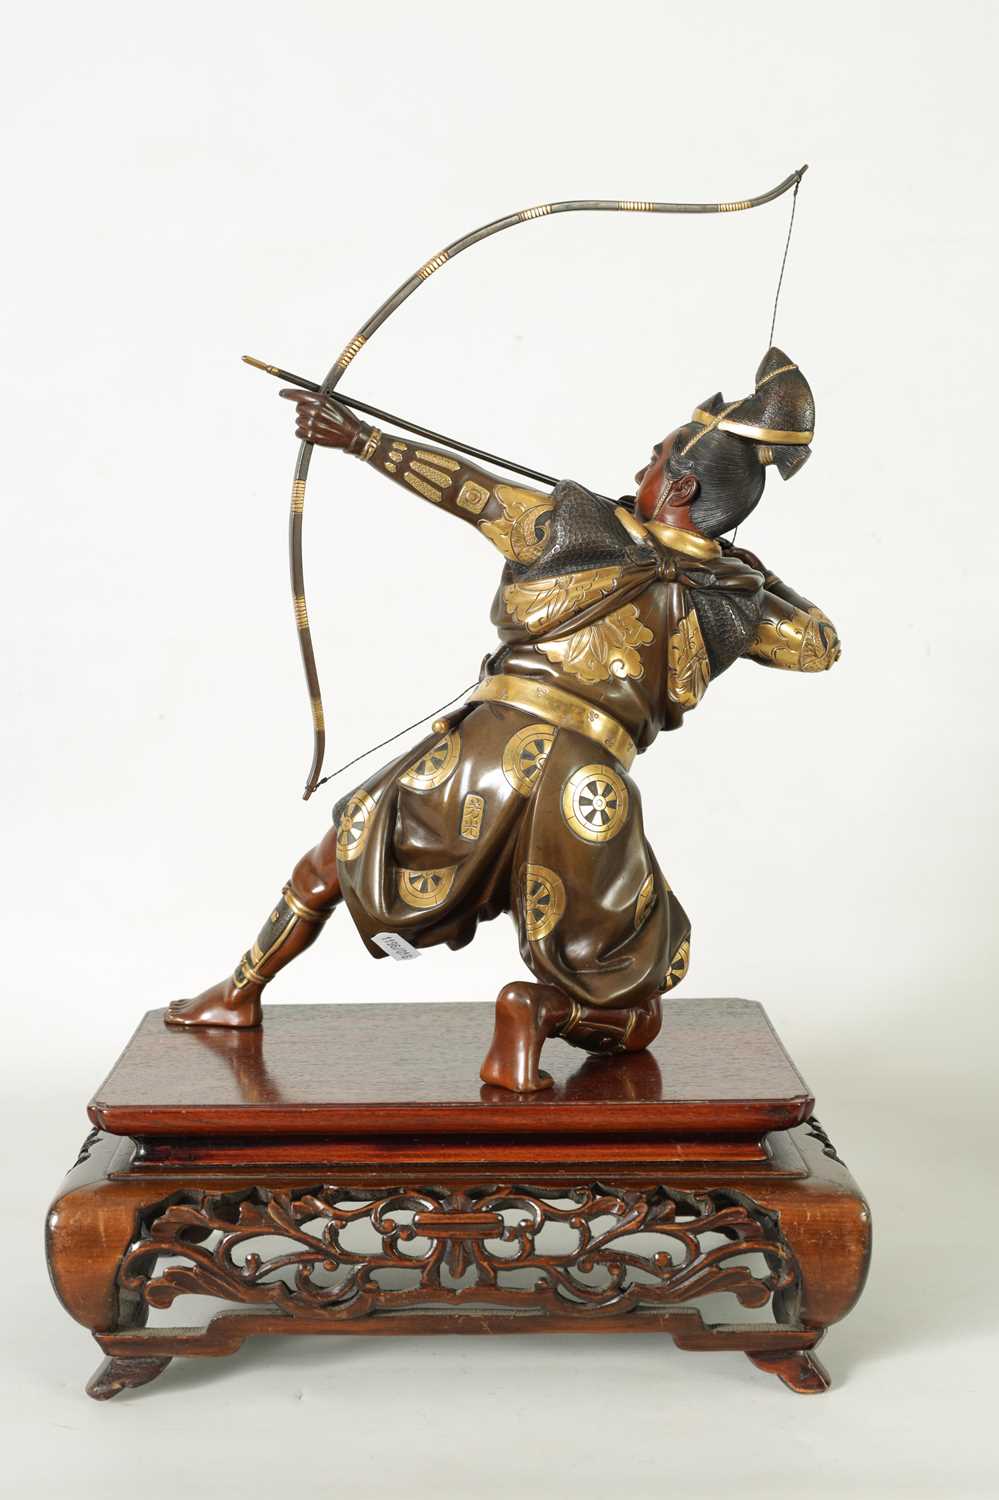 A FINE LATE 19TH CENTURY JAPANESE MEIJI PERIOD BRONZE AND MIXED METAL SAMURAI ARCHER OF LARGE SIZE - Image 6 of 13